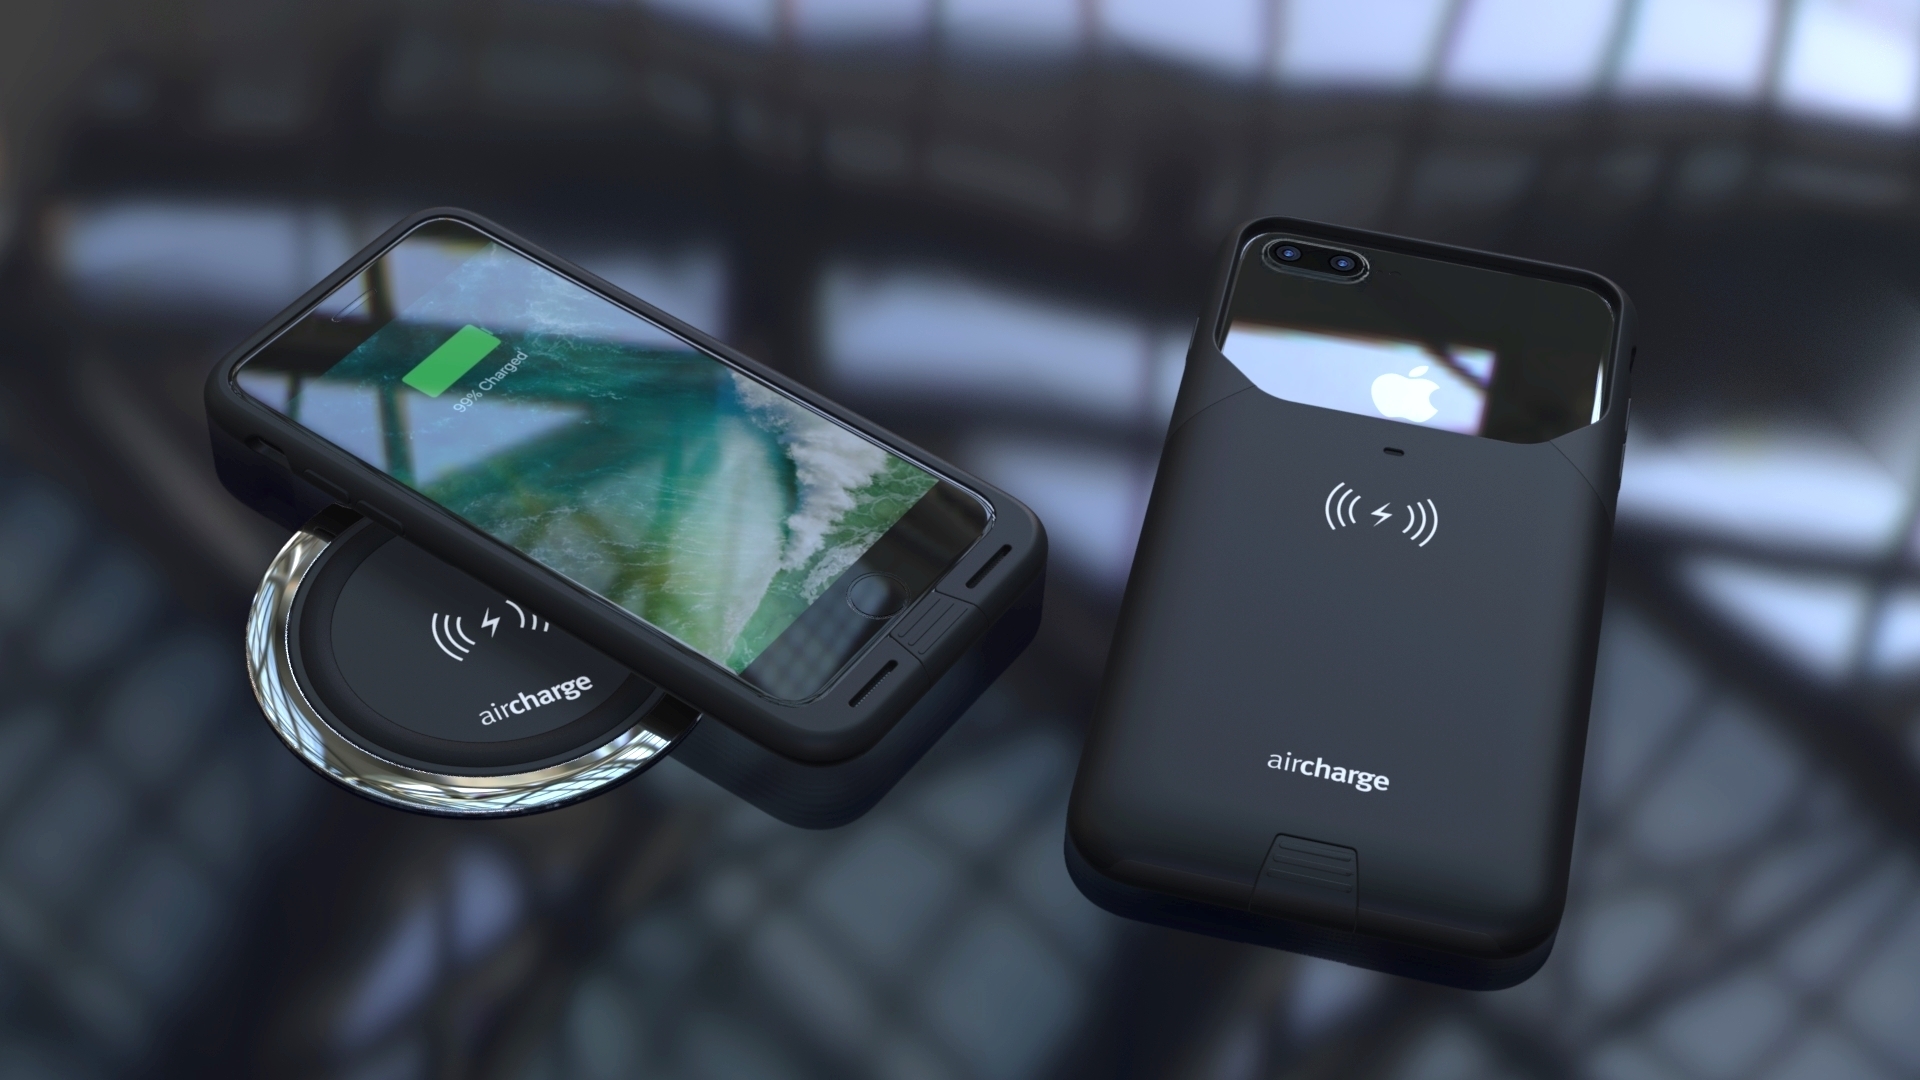 hardware optillen Overwinnen Aircharge Unveils New MFi iPhone 7 & iPhone 7 Plus Wireless Charging Cases  | Business Wire